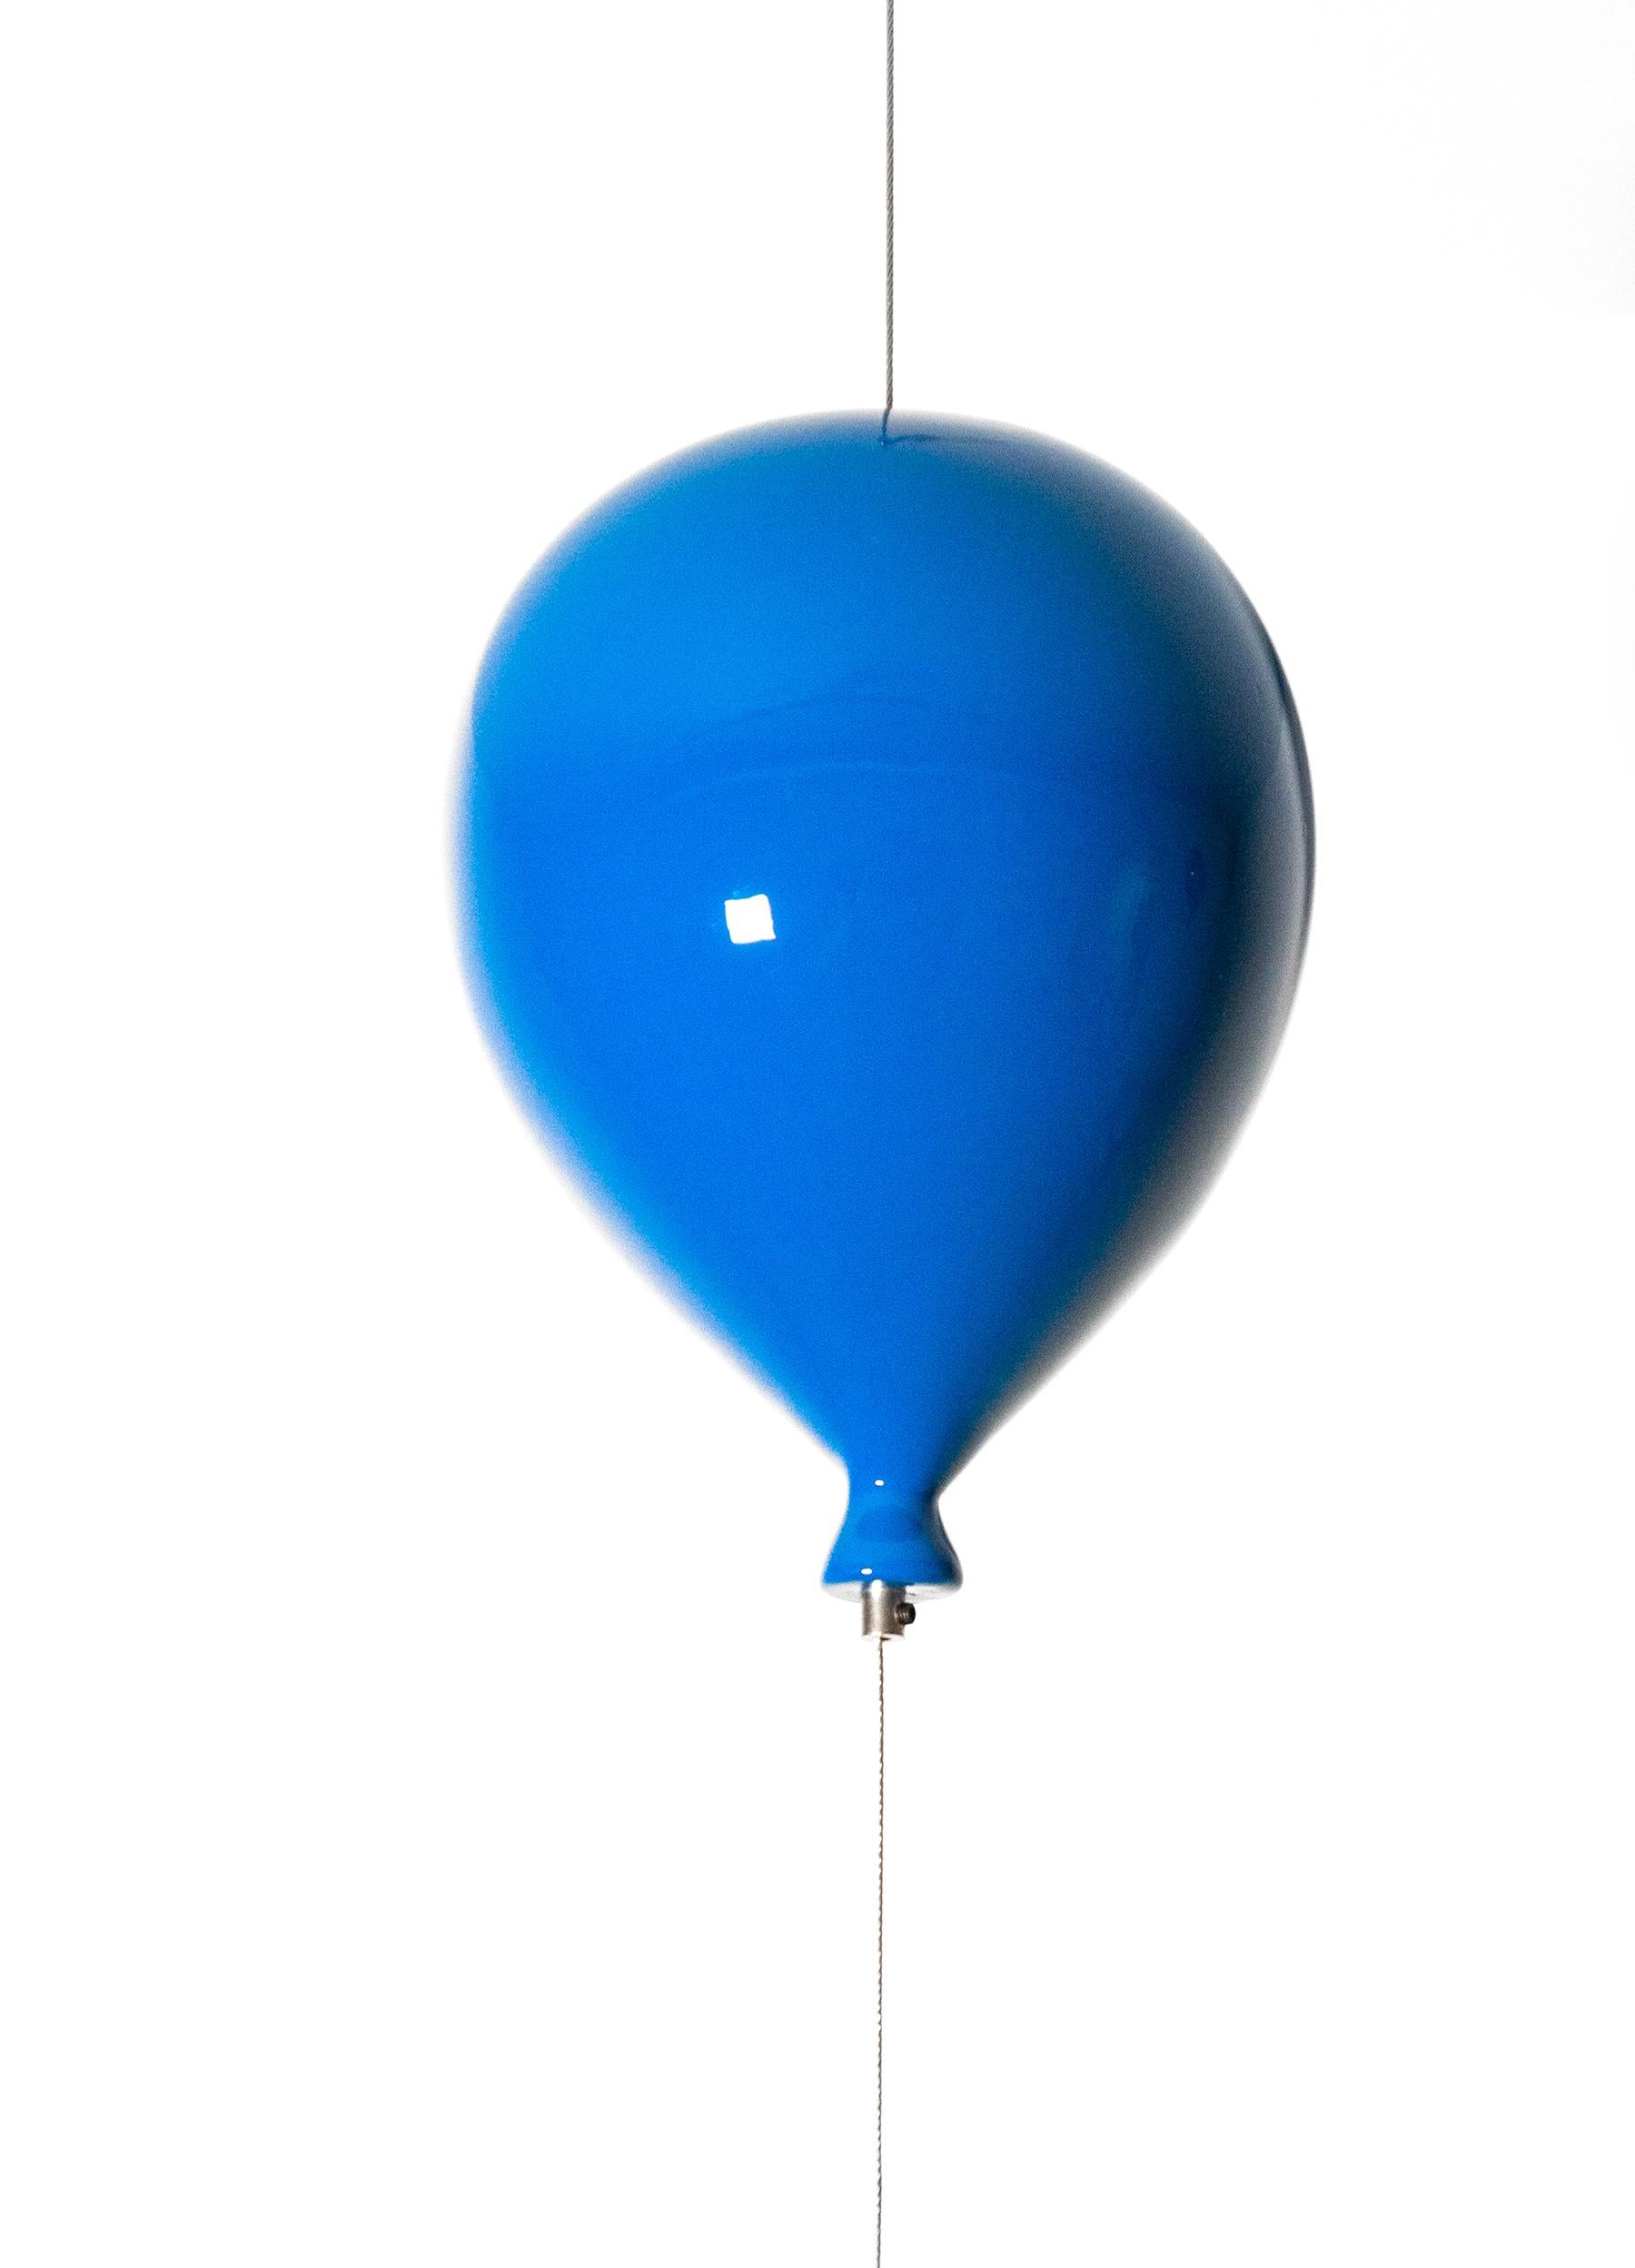 Abandon - woman, figurative, blue balloon, suspended steel sculpture For Sale 2